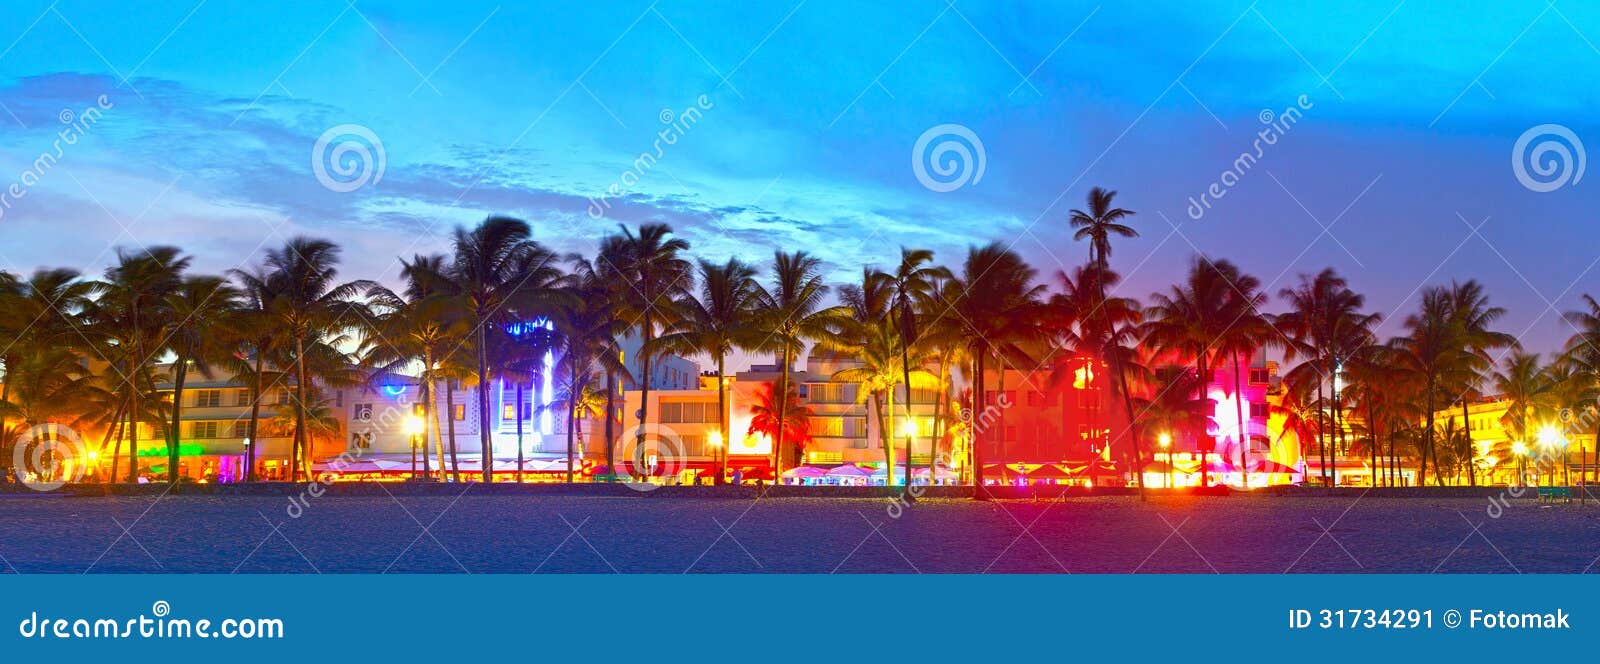 miami beach, florida hotels and restaurants at sunset